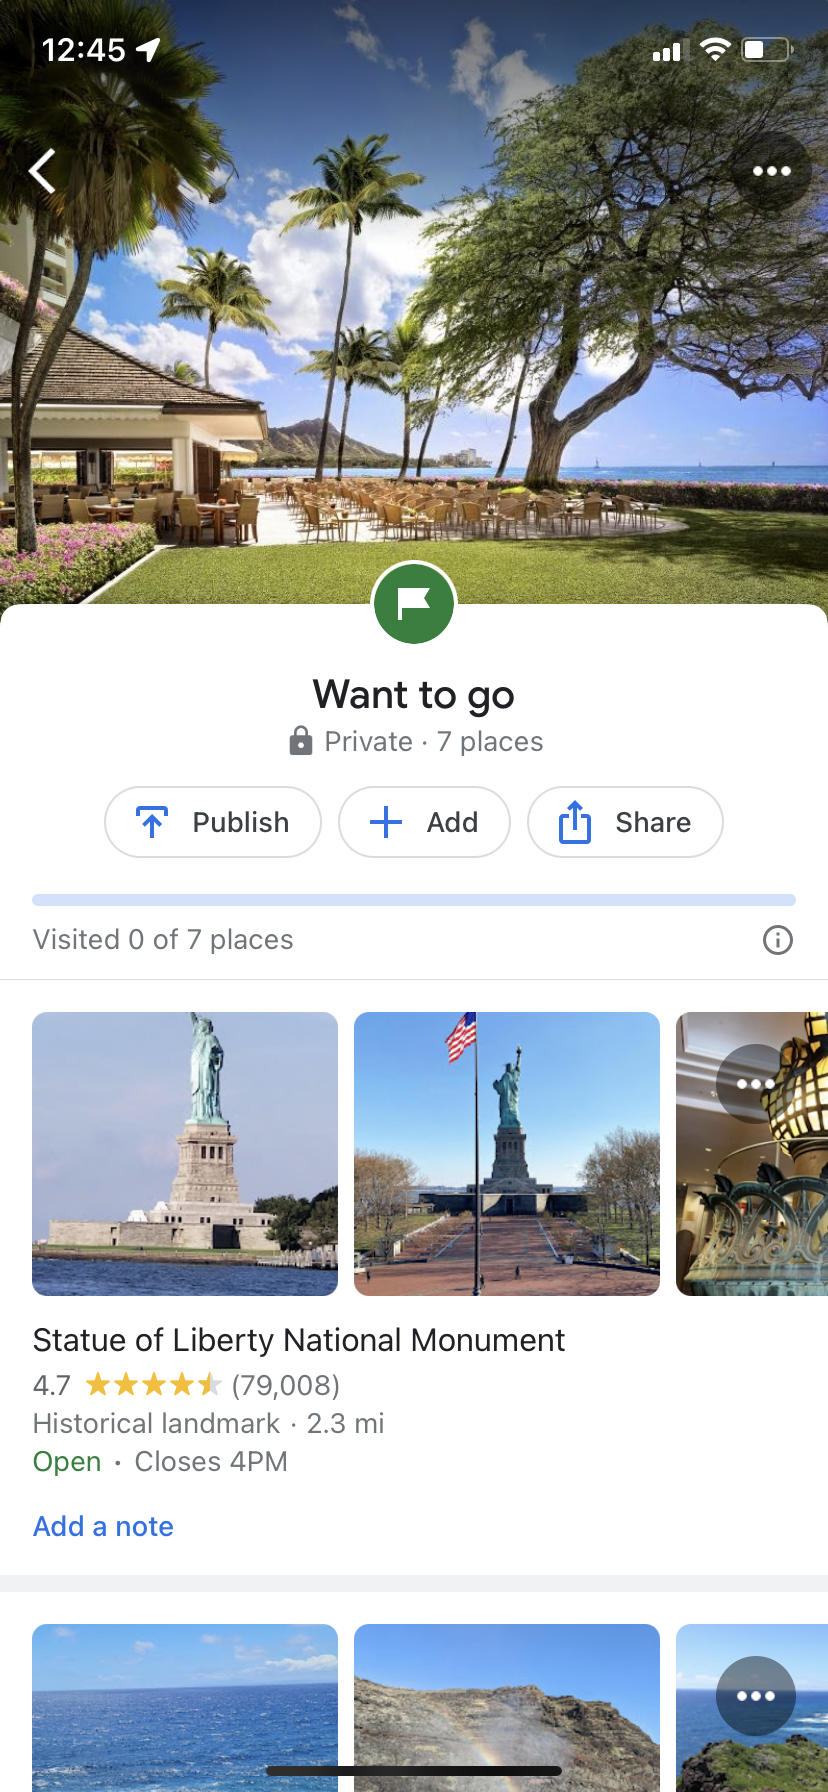 A Google Maps page titled "Want to go."